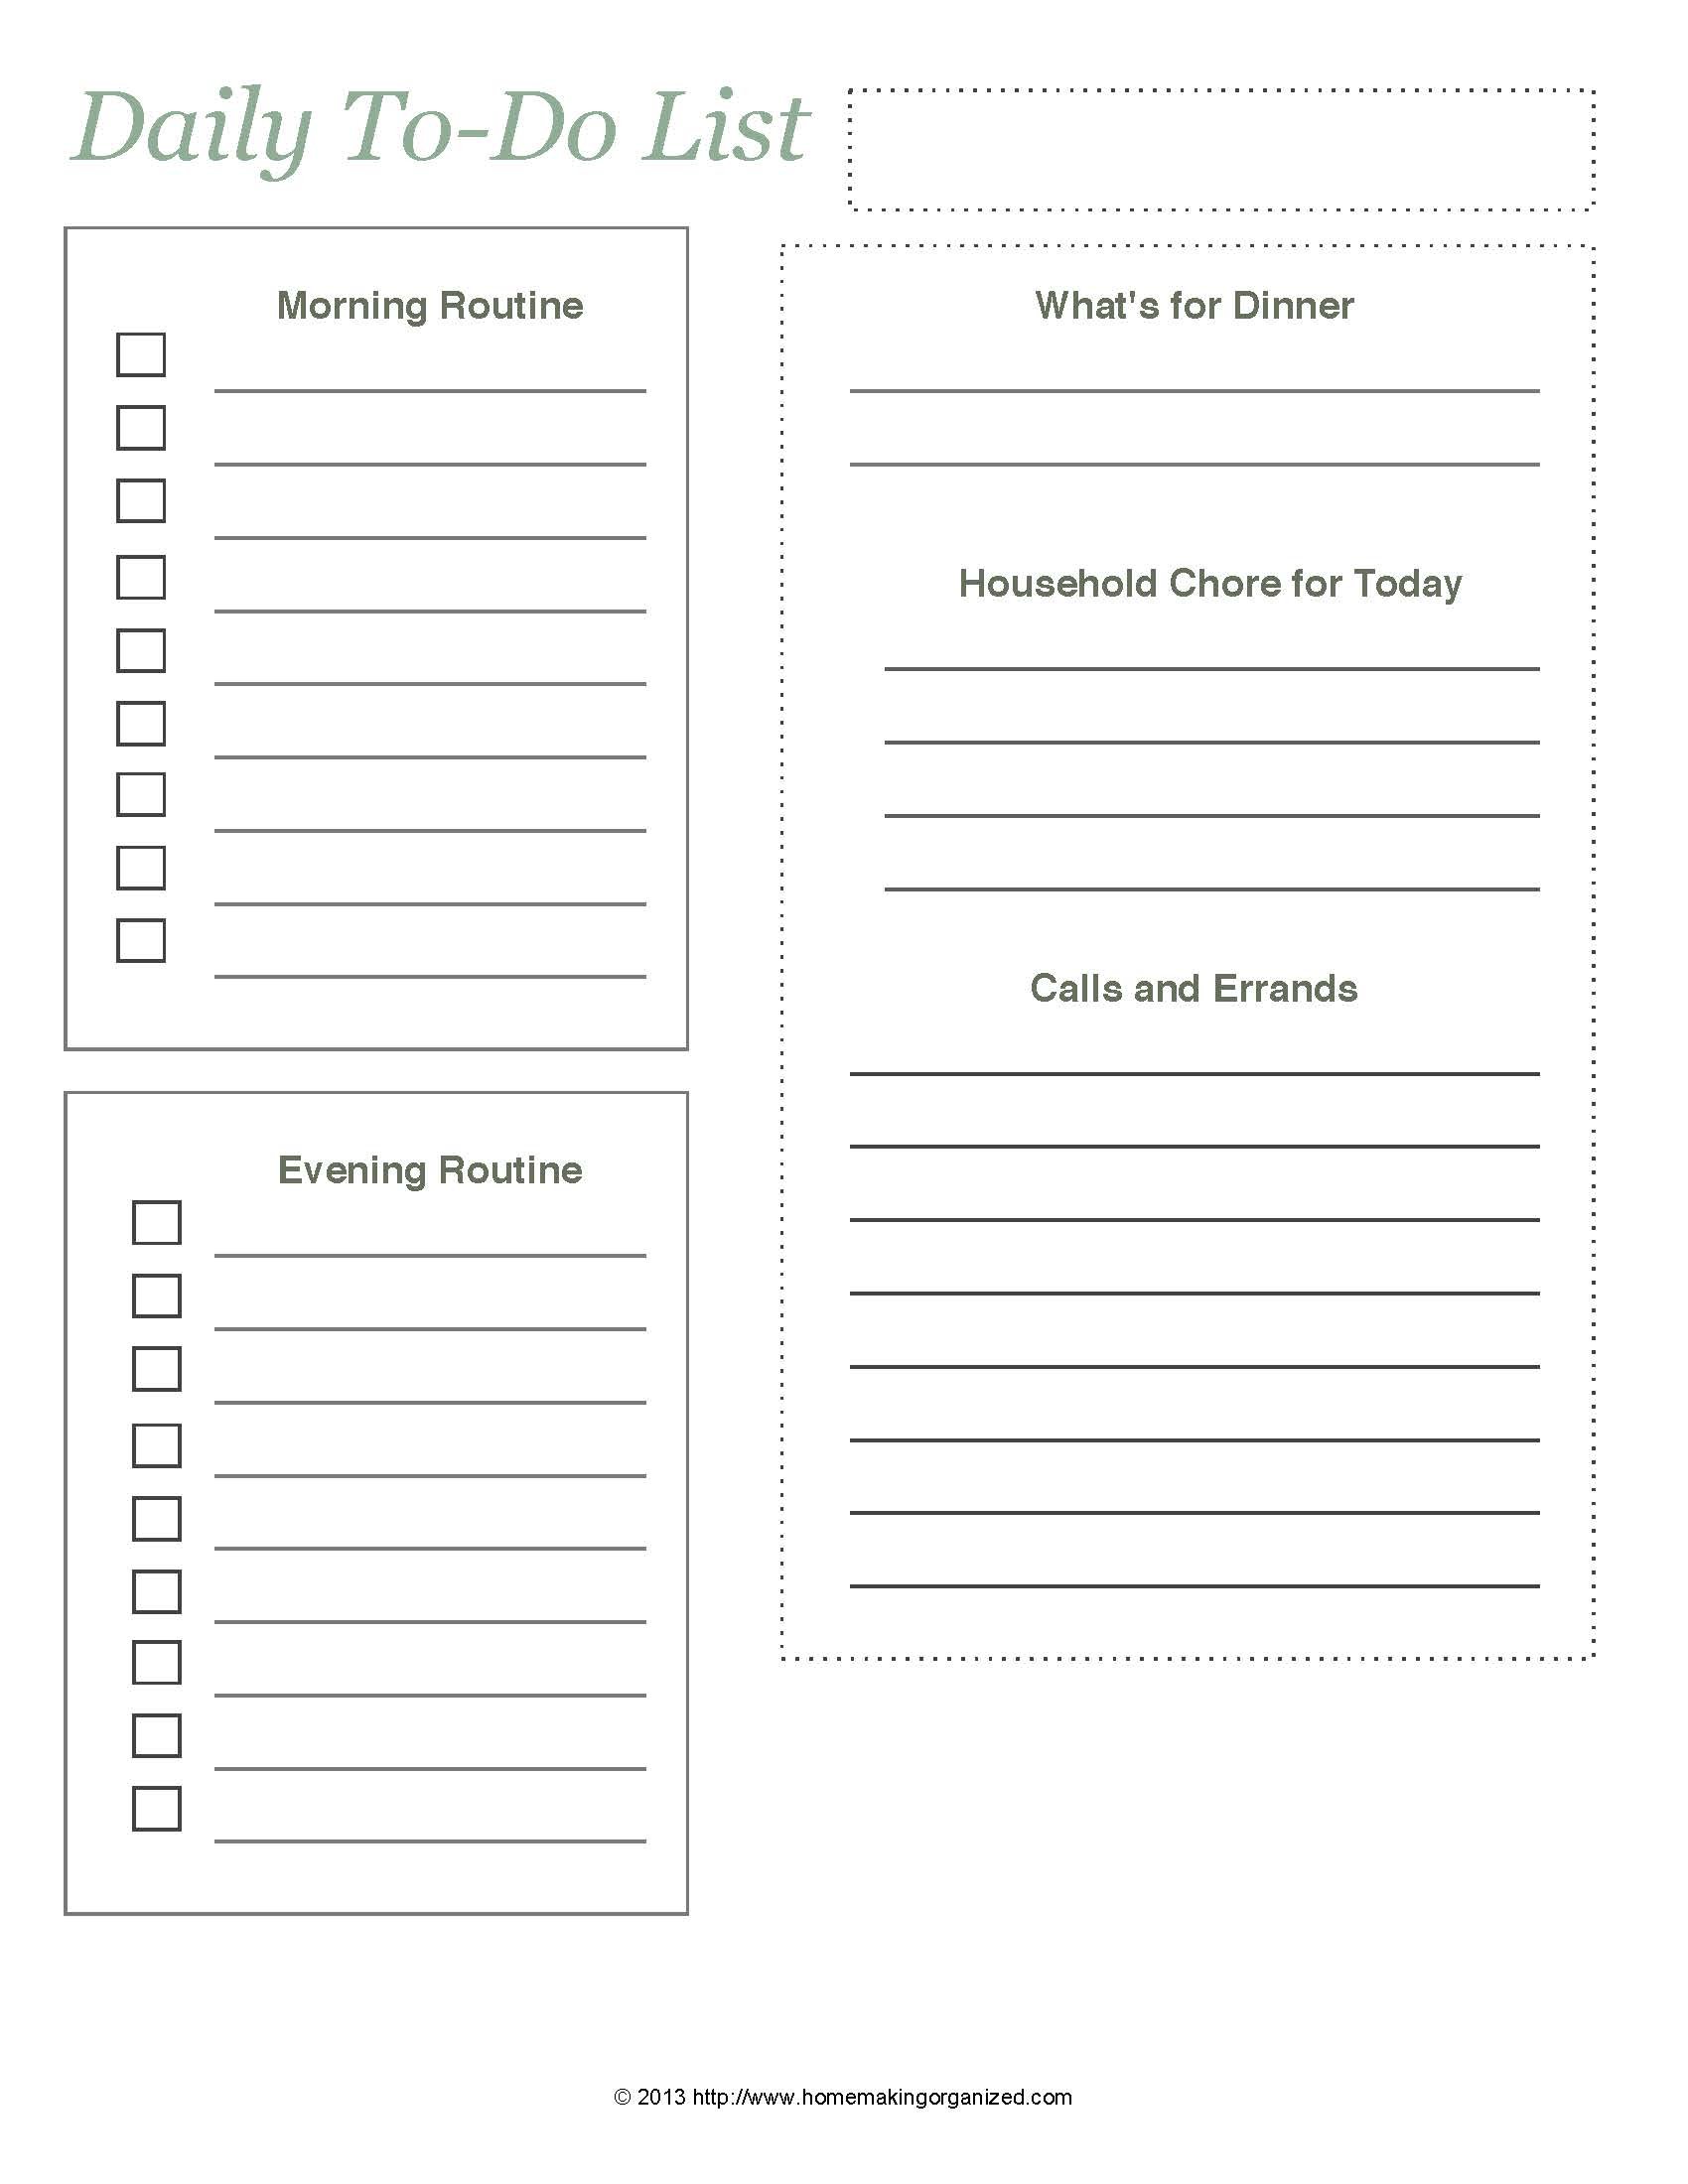 Daily To-Do List Free Printable - Homemaking Organized